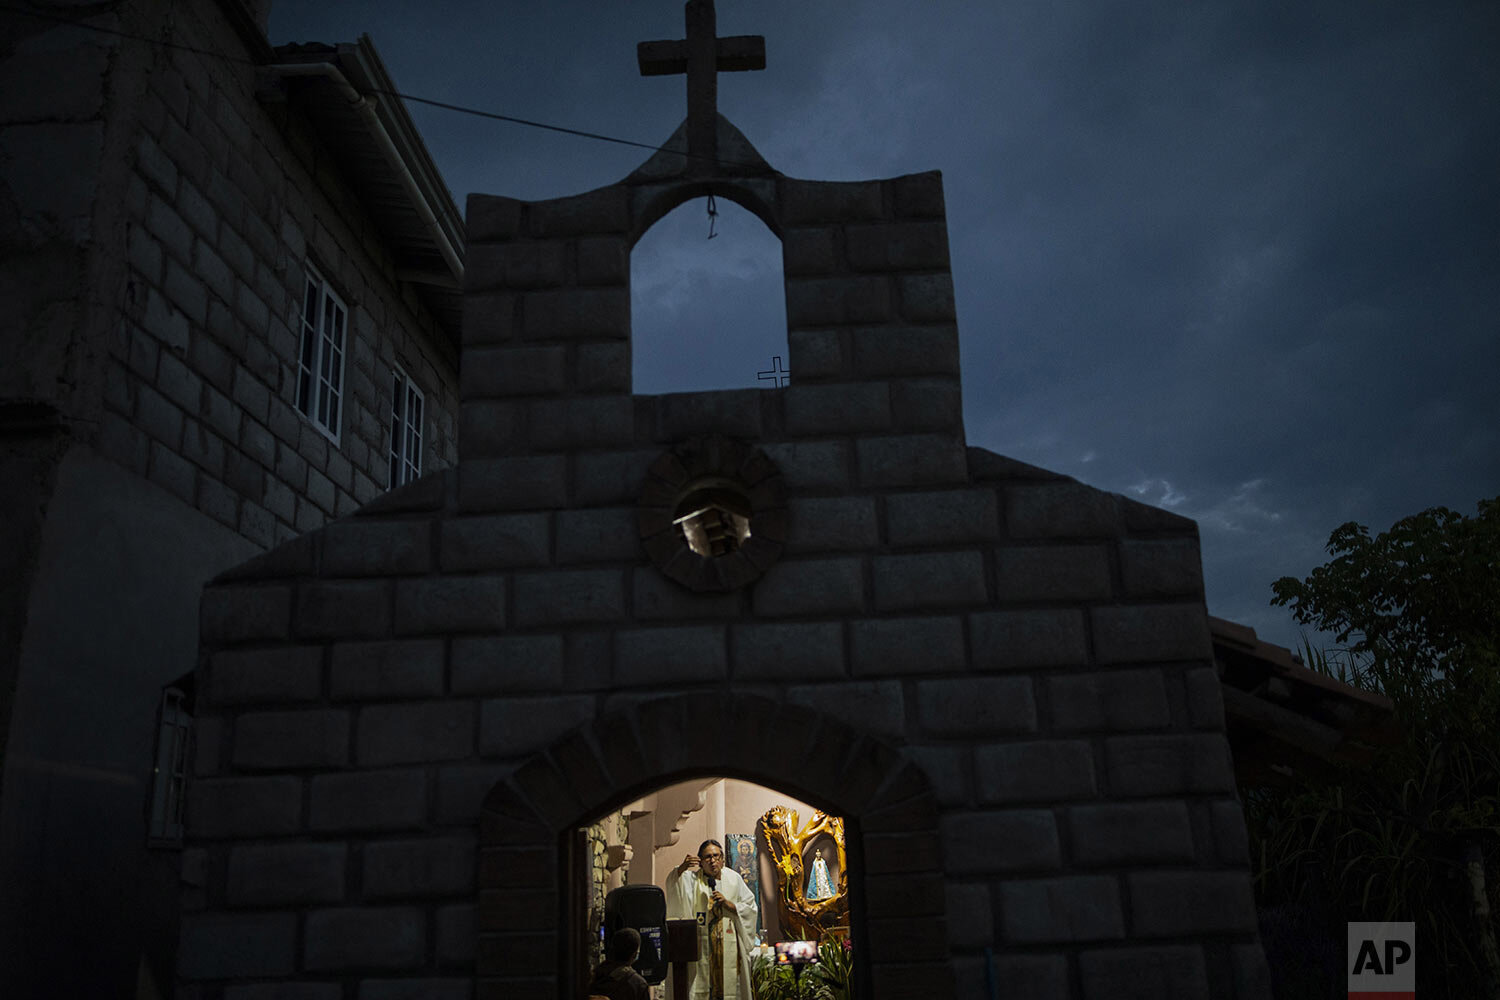  Friar Leopoldo Serrano celebrates Mass, broadcast via Facebook, at a chapel in Mission San Francisco de Asis, Honduras, late Saturday, June 19, 2021. Located on the border of the departments of Santa Barbara and Copan, his sprawling mission straddle